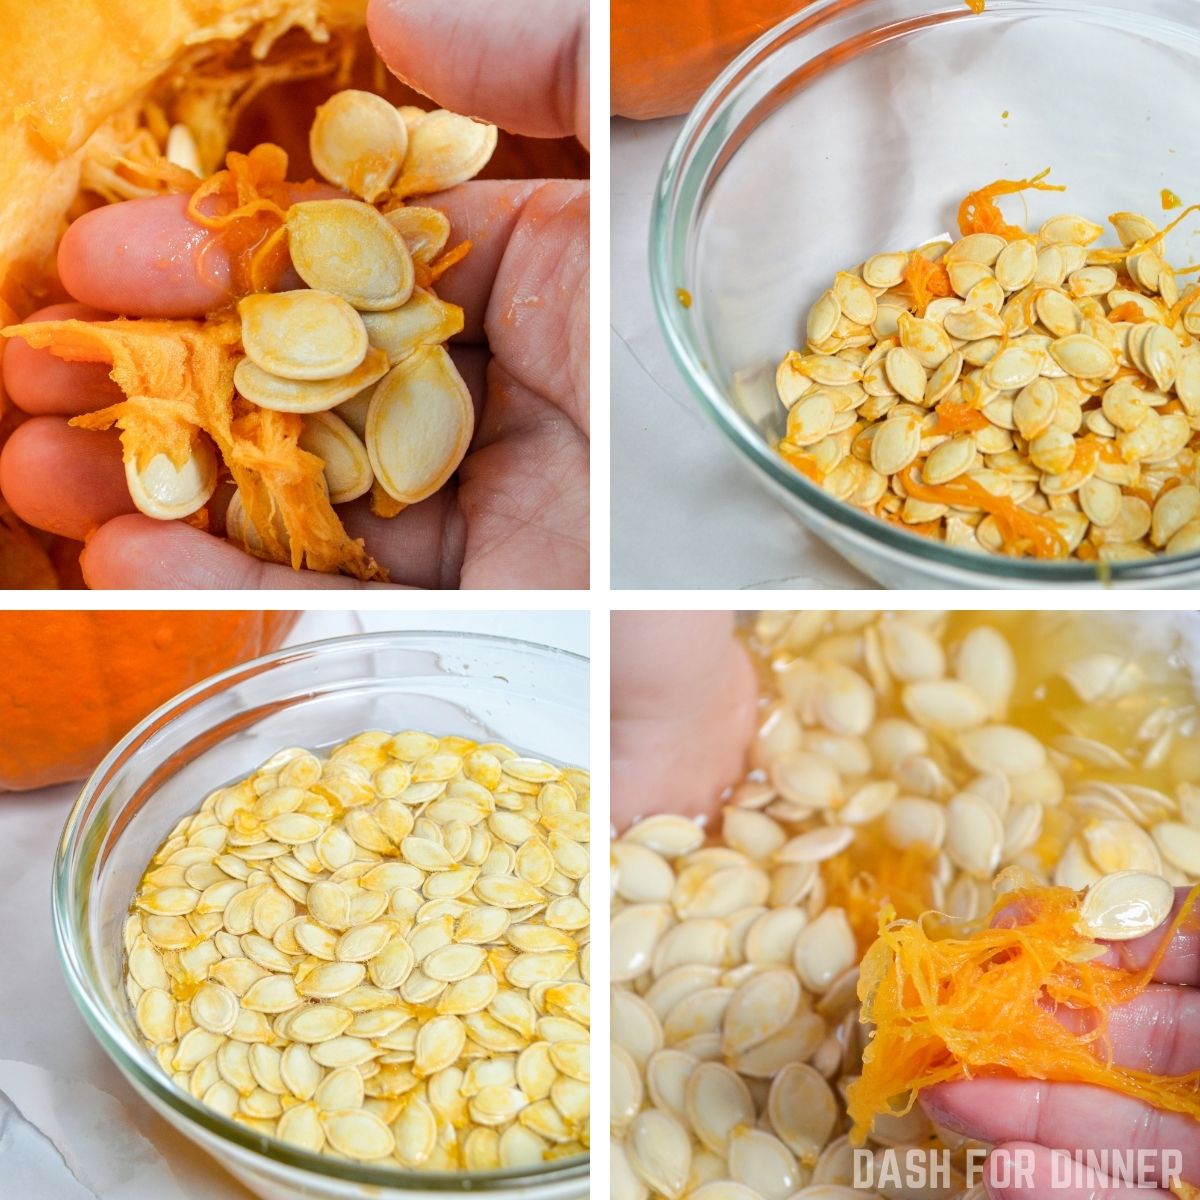 Removing pumpkin seeds from a pumpkin, removing the stringy pulp, and soak to help remove any excess pulp.